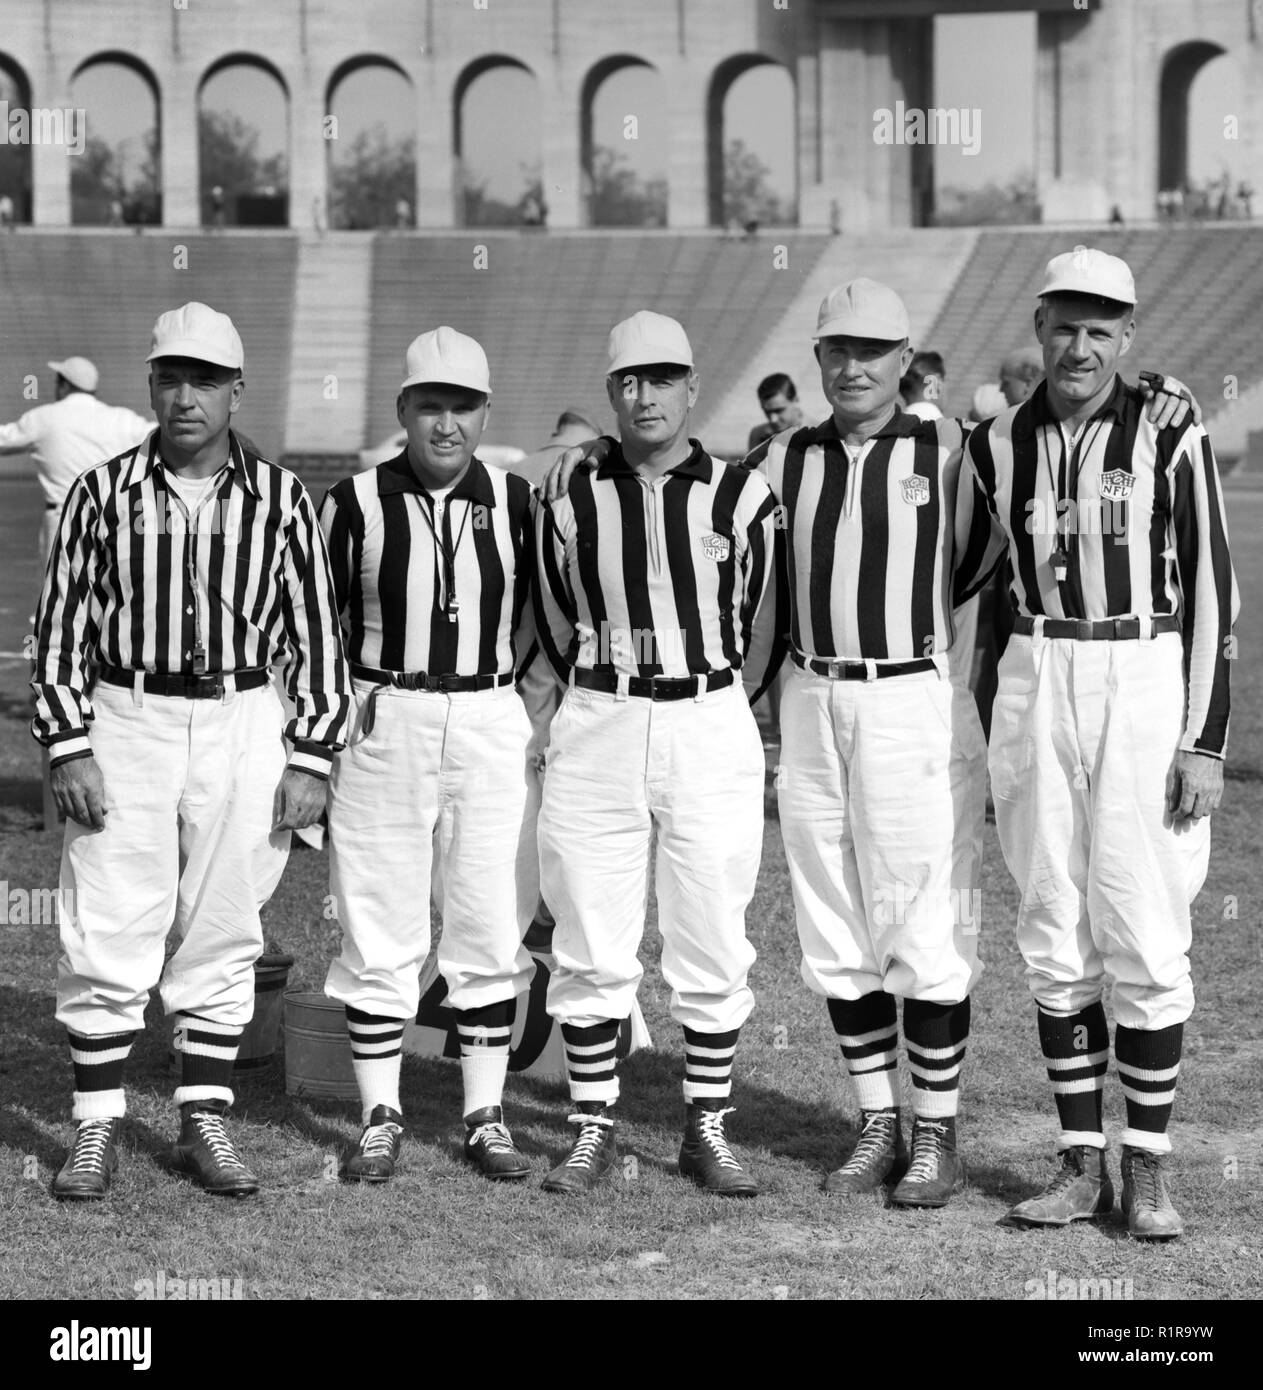 NFL refs pose for a group shot before a game at the Los Angeles Coliseum in the early 1950s. Stock Photo